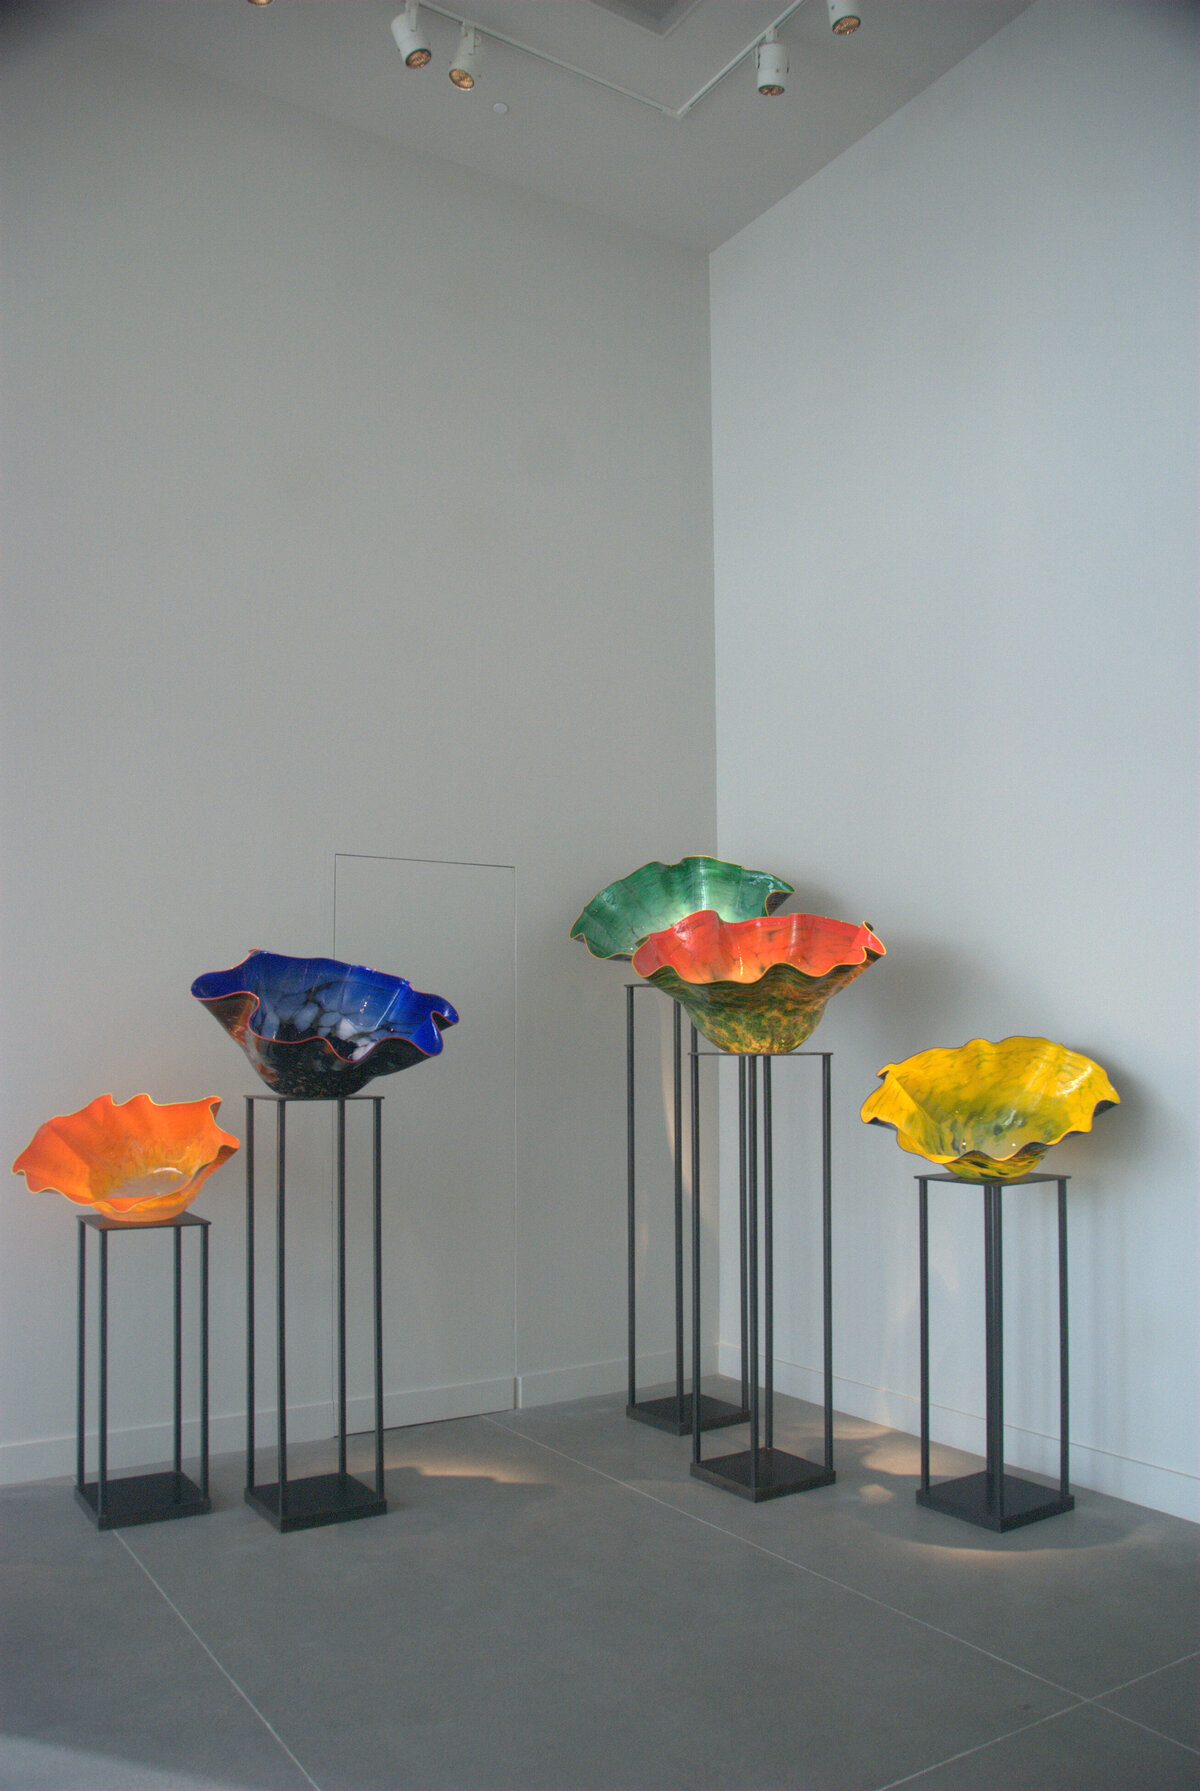 . Experience breathtaking glass installations and vibrant colors.